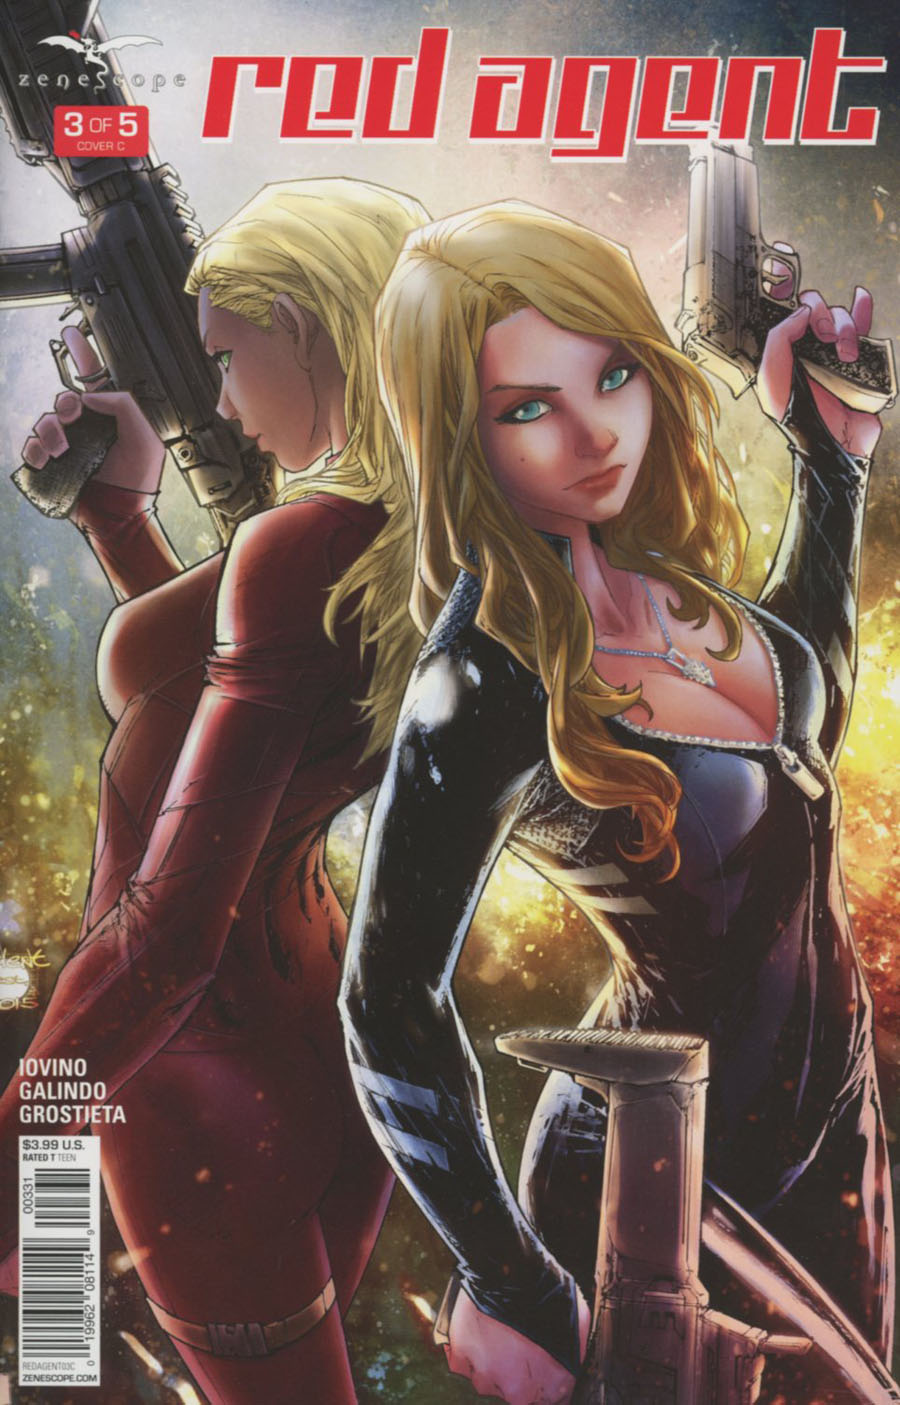 Grimm Fairy Tales Presents Red Agent #3 Cover C Talent Caldwell